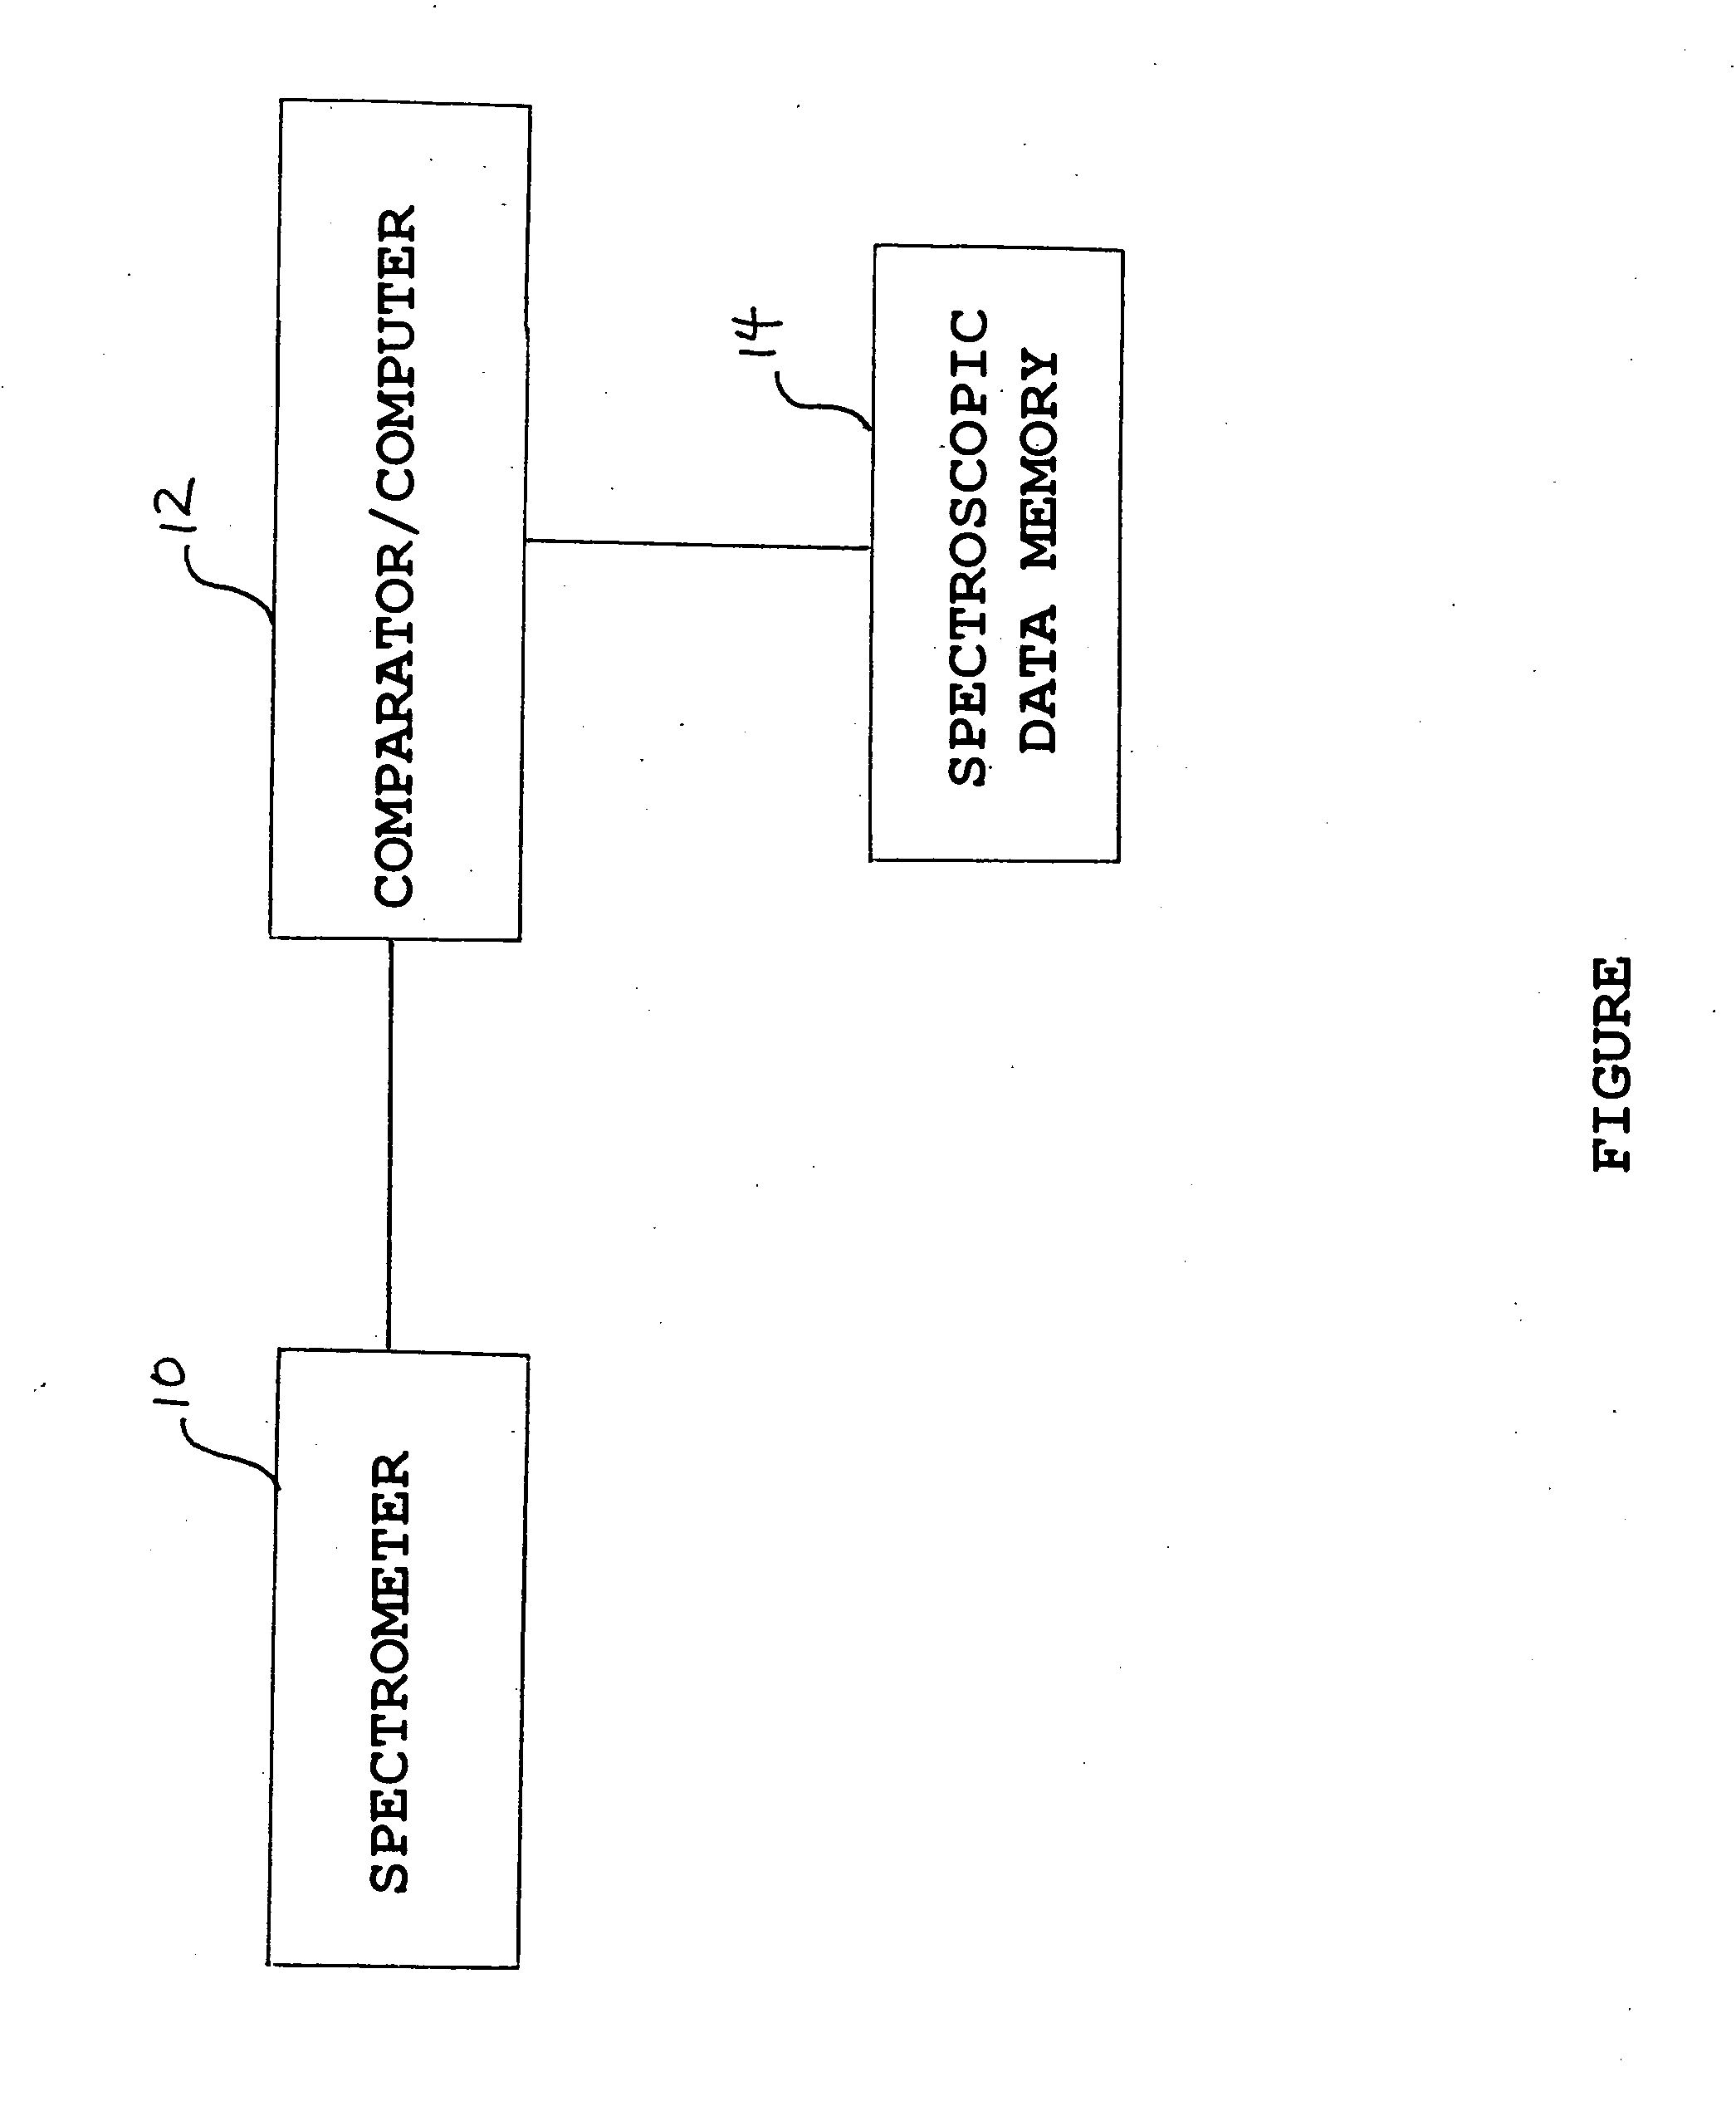 System and method for detecting pain and its components using magnetic resonance spectroscopy